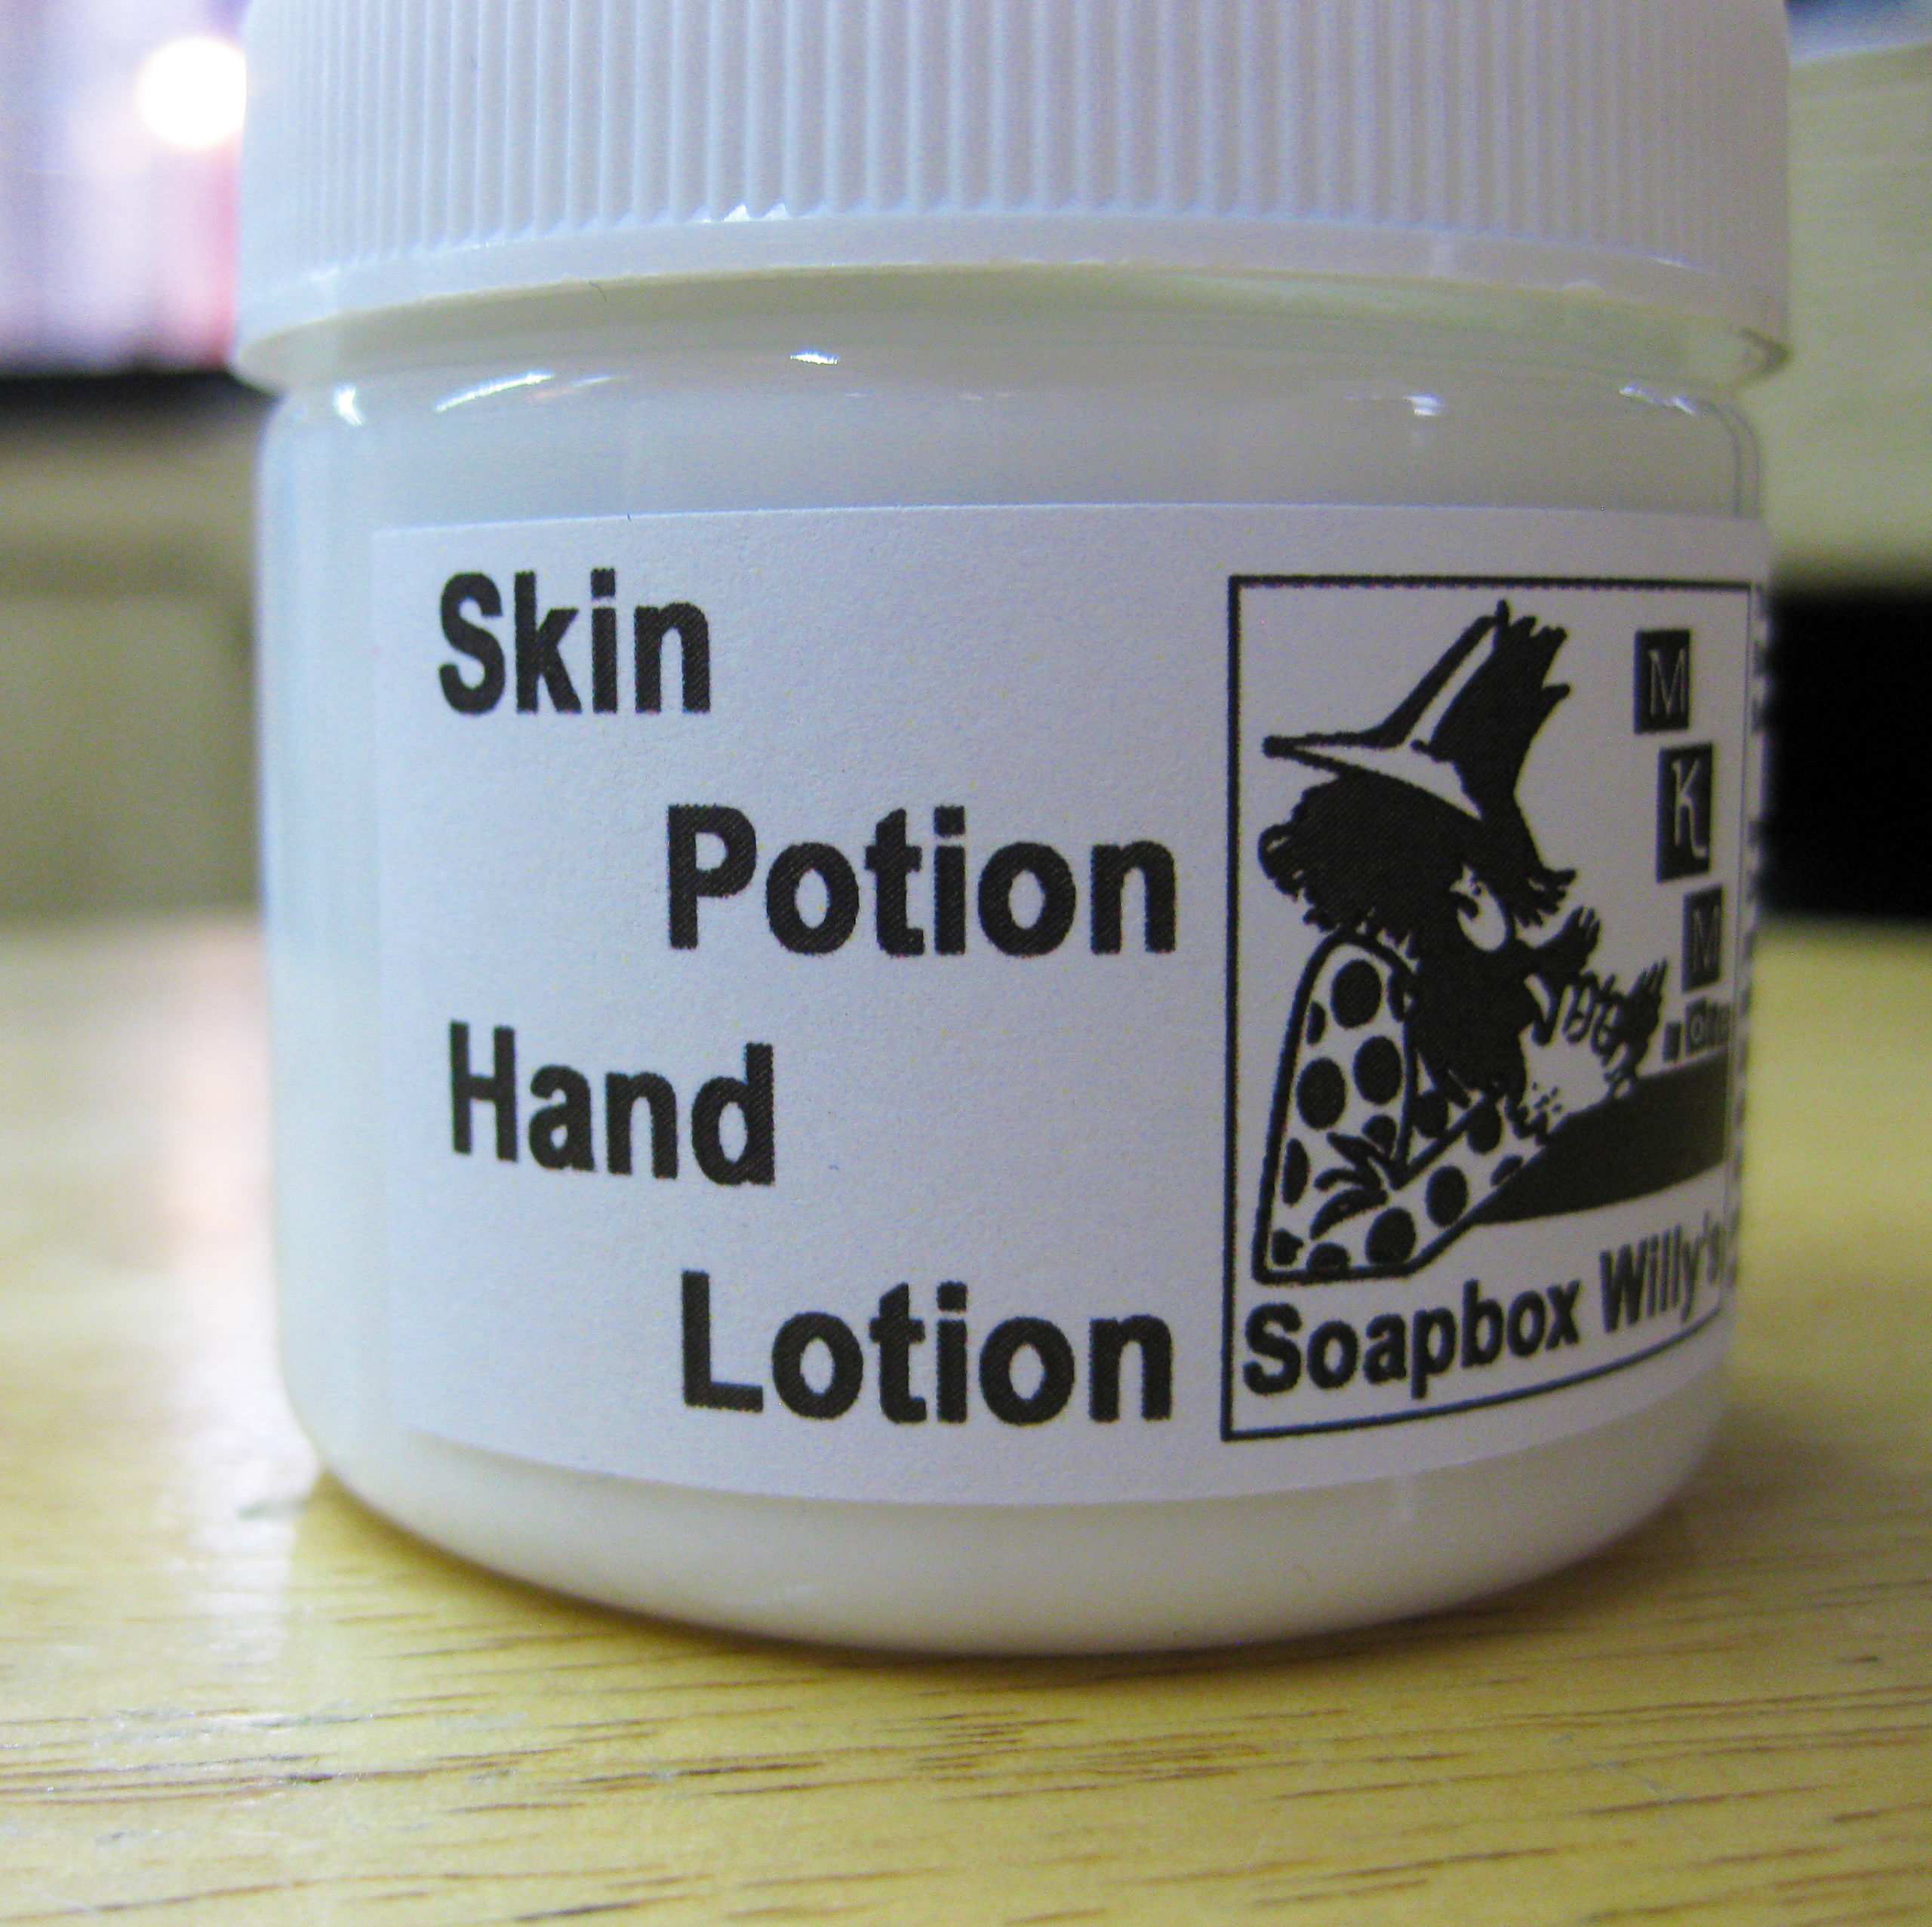 Skin Potion Hand Lotion